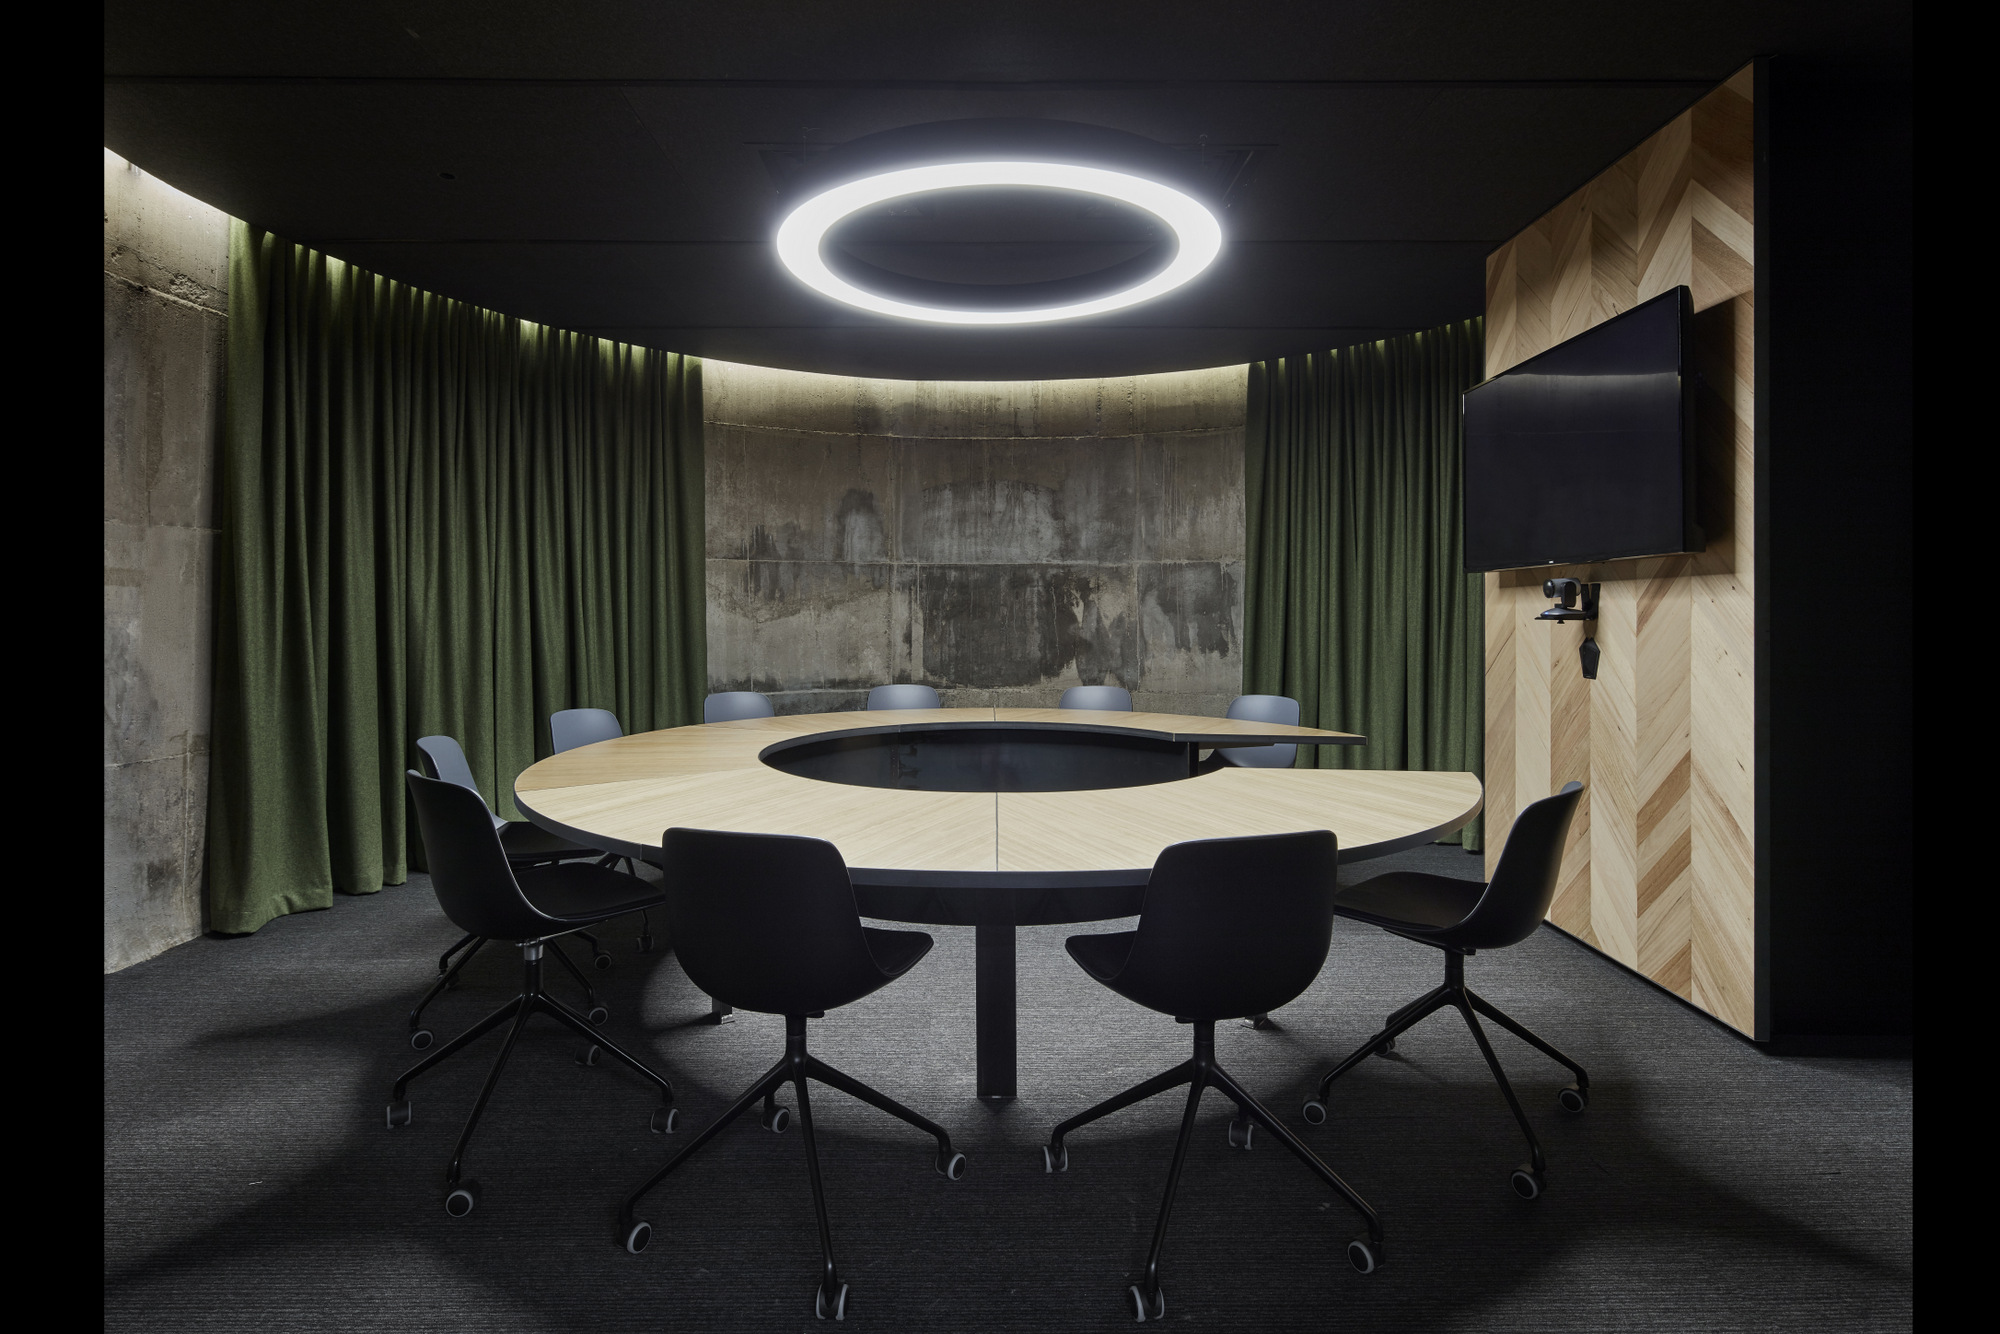 Inspiring Office Meeting Rooms Reveal Their Playful Designs